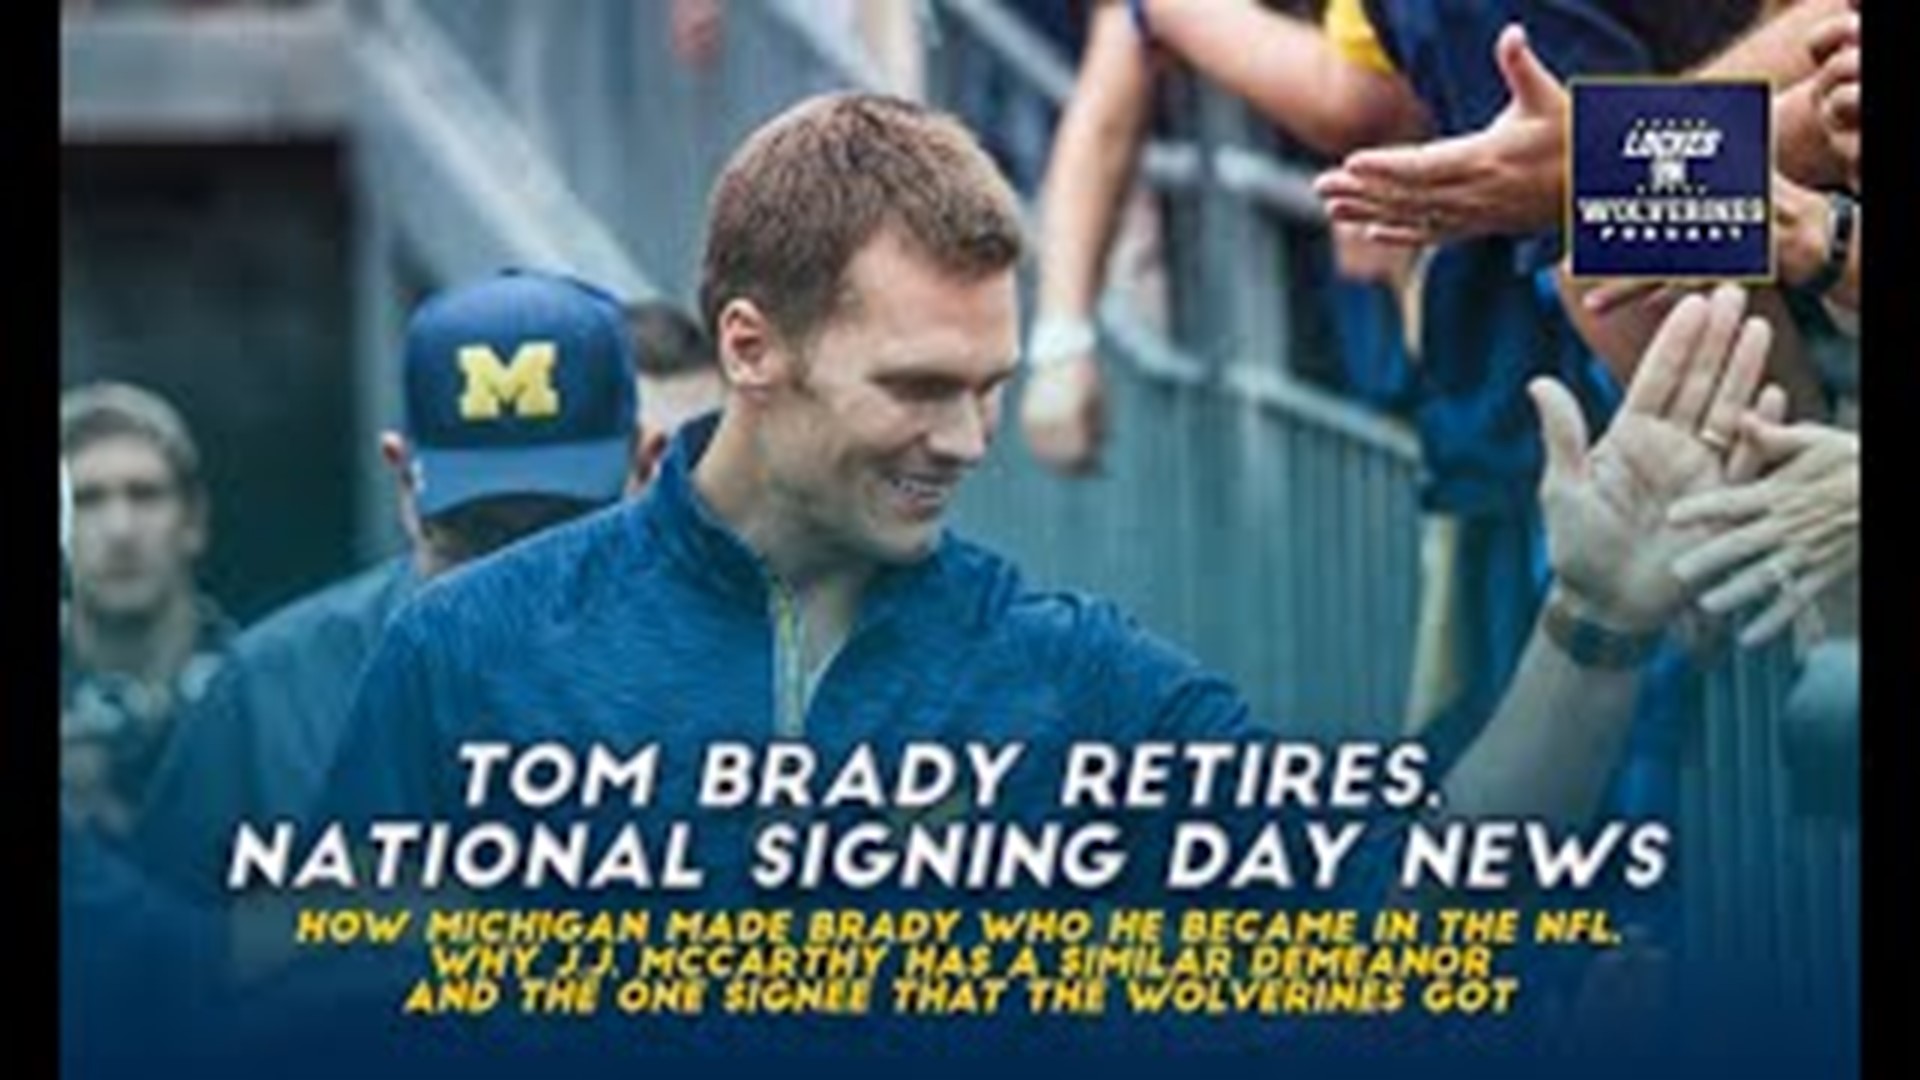 Tom Brady's career with Michigan football the NFL. Why the Wolverines shaped who he became and similarities with J.J. McCarthy. Plus, signing day: Brandt commits.